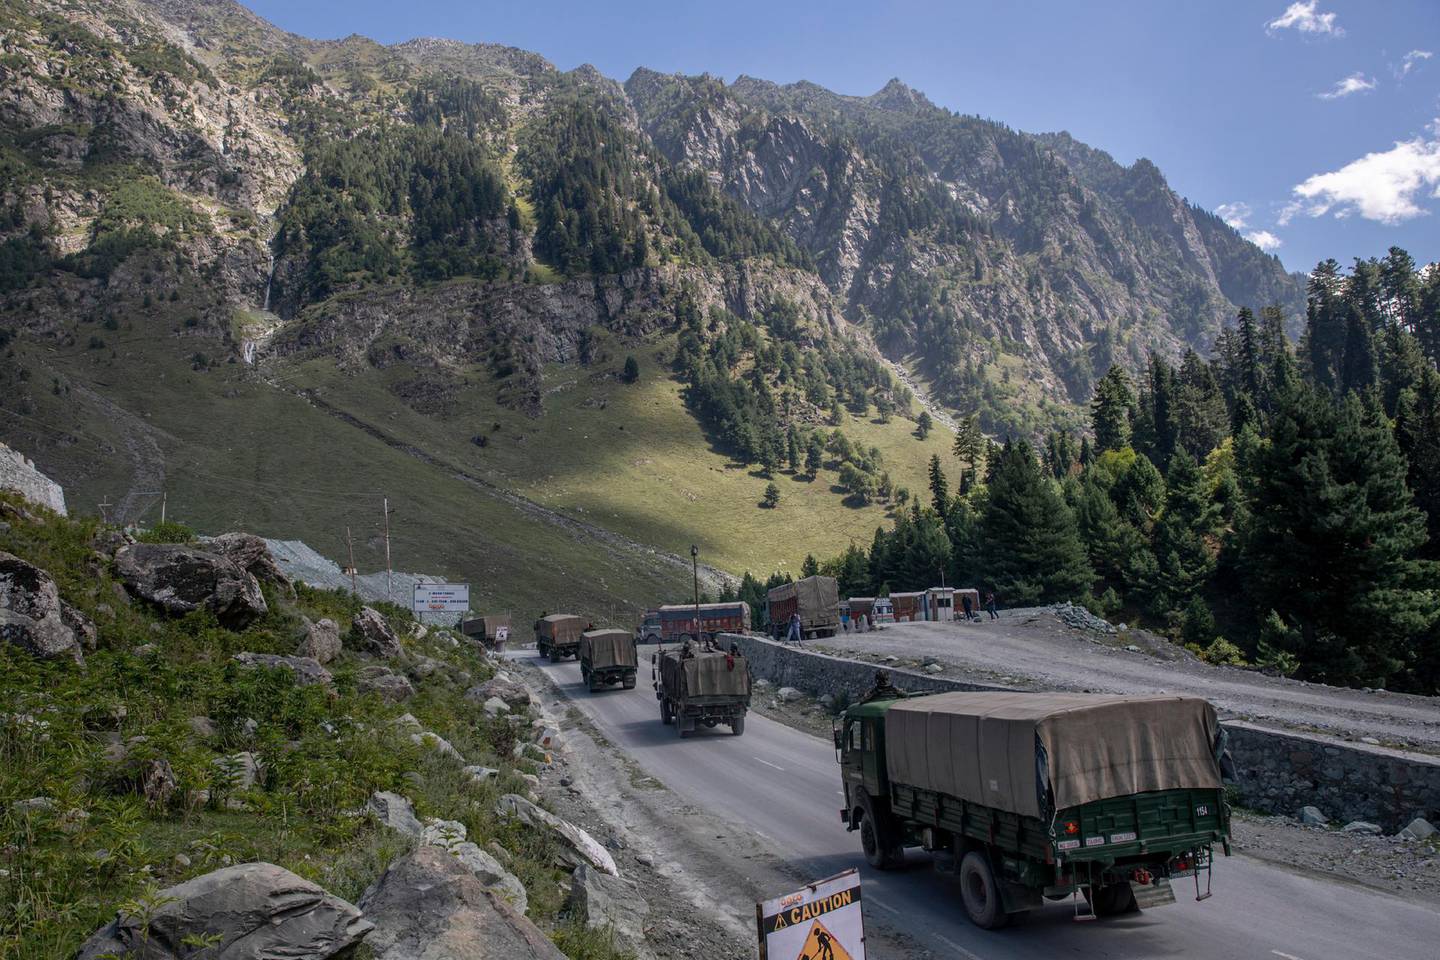 FILE - In this Sept. 9, 2020, file photo, an Indian army convoy moves on the Srinagar- Ladakh highway at Gagangeer, northeast of Srinagar, Indian-controlled Kashmir. The Indian military said it apprehended a Chinese soldier Monday, Oct. 19, in the remote Ladakh region, where the two countries are locked in a monthslong military standoff along their disputed border. (AP Photo/ Dar Yasin, File)